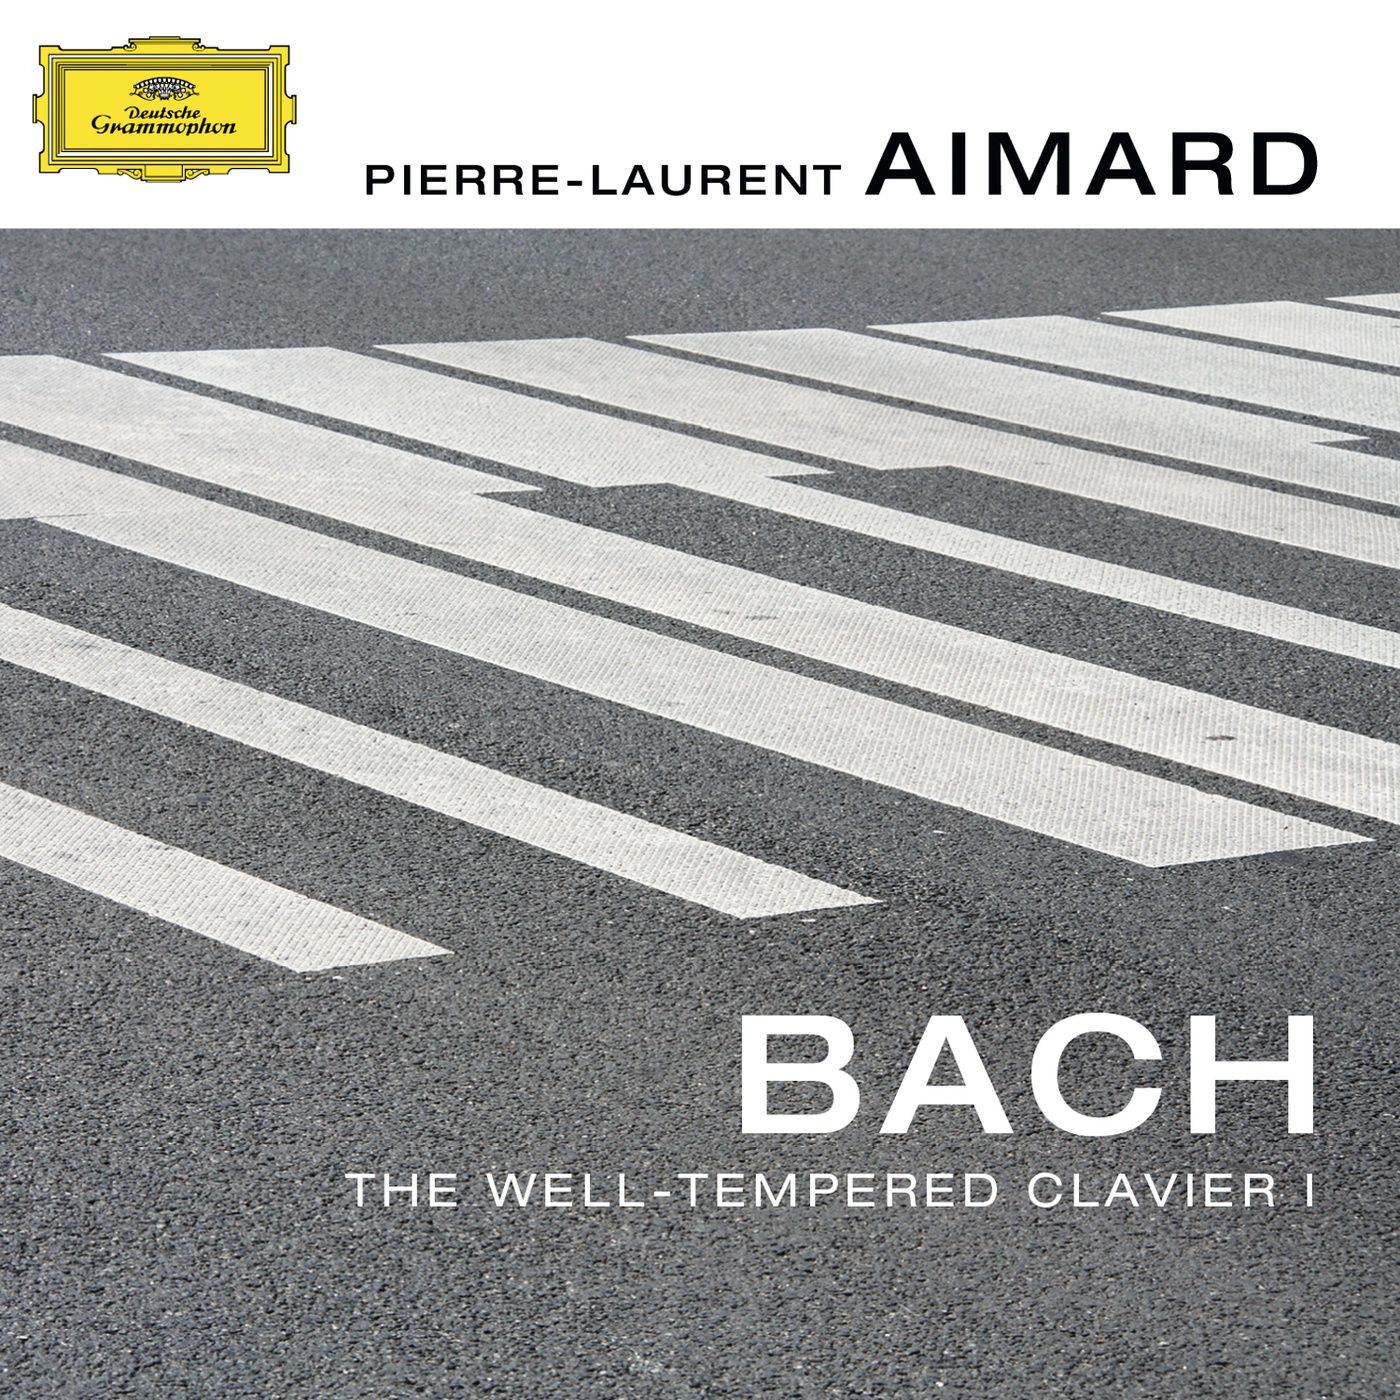 J.S. Bach: Prelude & Fugue In D Minor (Well-Tempered Clavier, Book I, No.6), BWV 851 - 1. Prelude